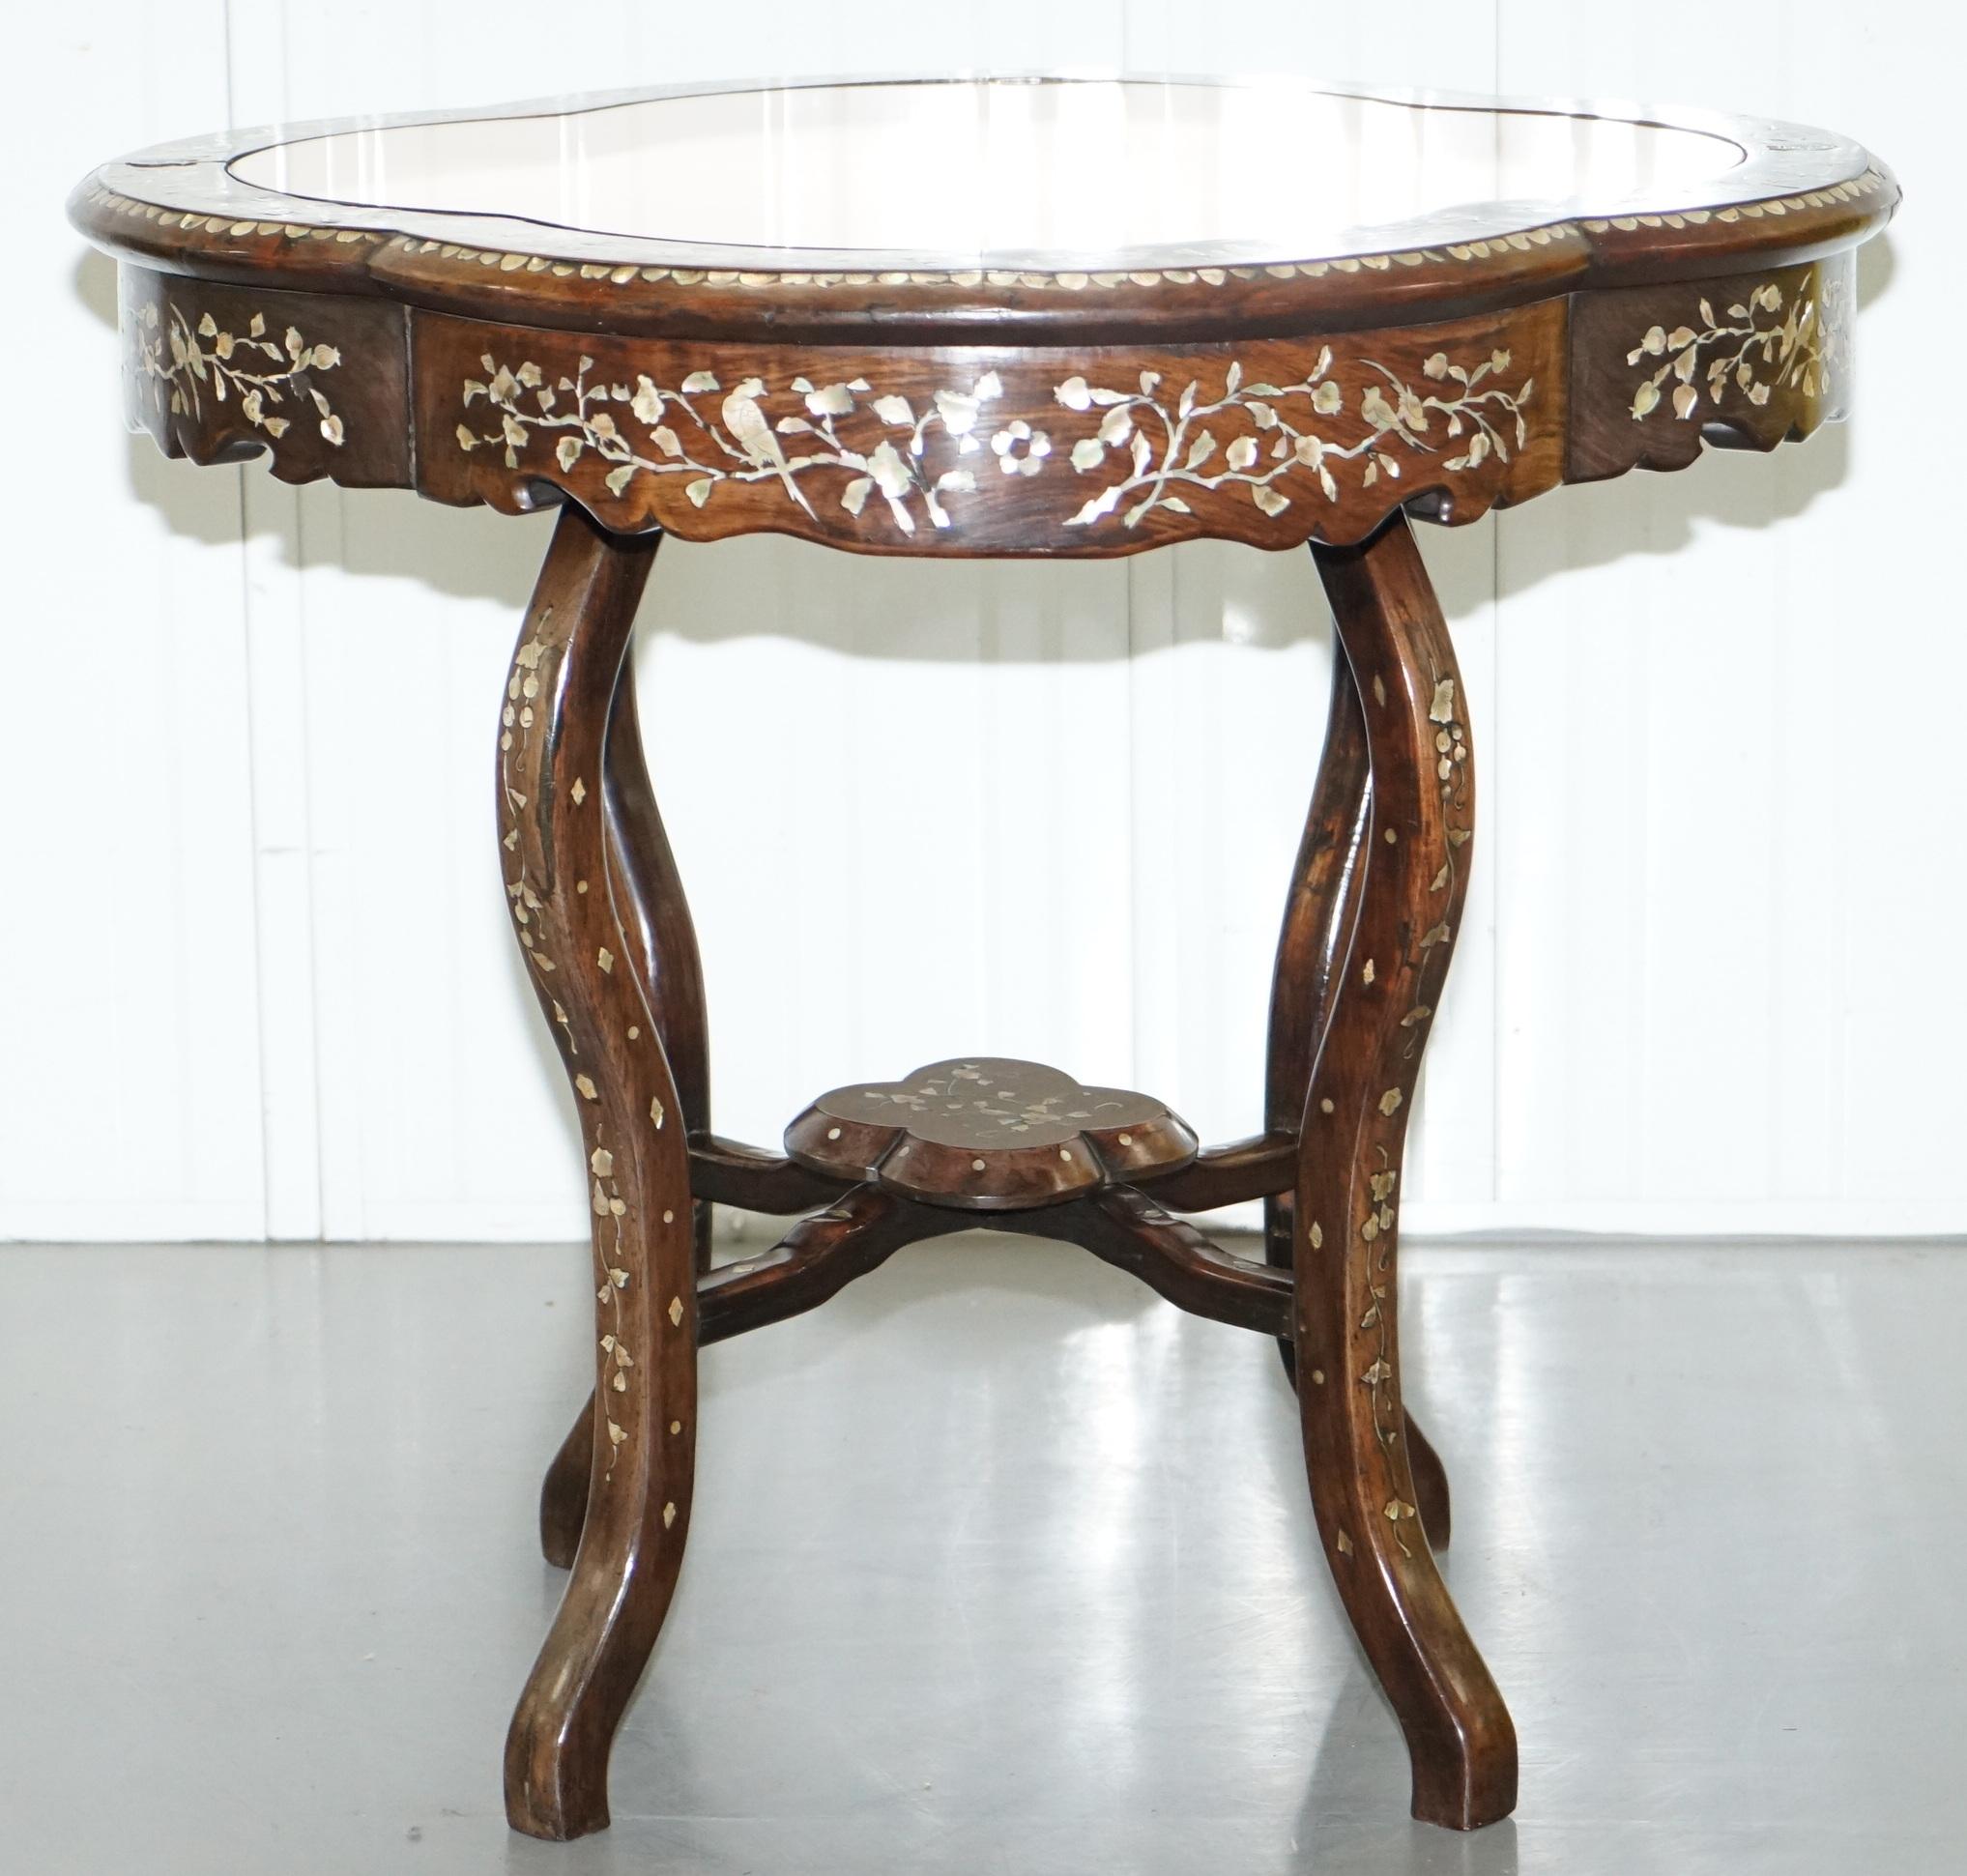 1924 British Empire Chinese Exhibition Rosewood & Mother of Pearl Inlaid Table 3